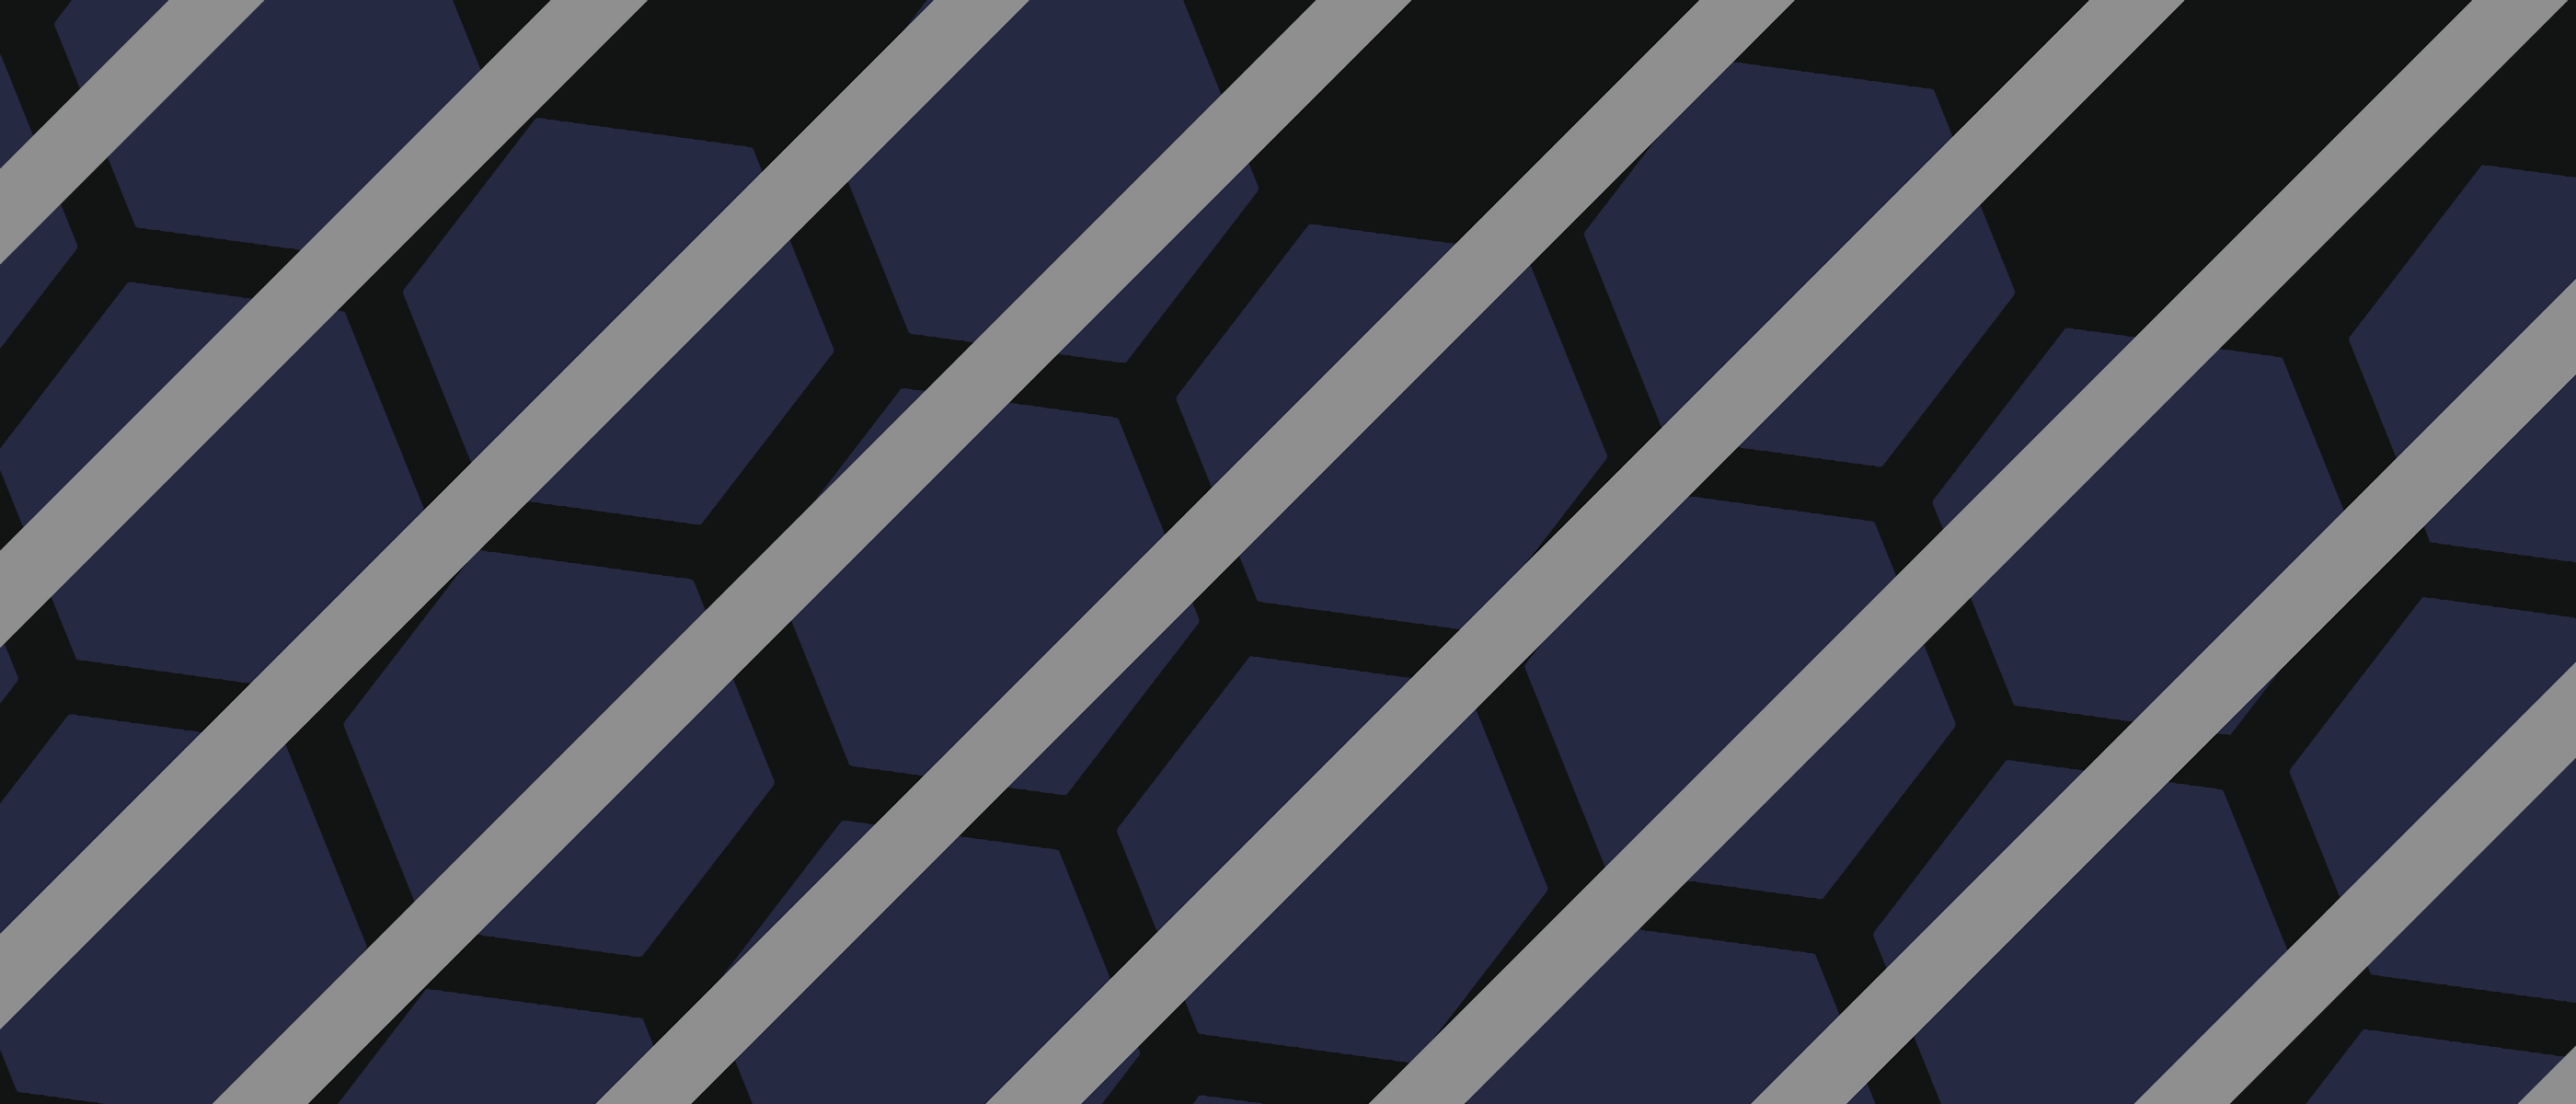 Some light-gray colored Diagonal stripes with blue hexagon pattern behind it by spe